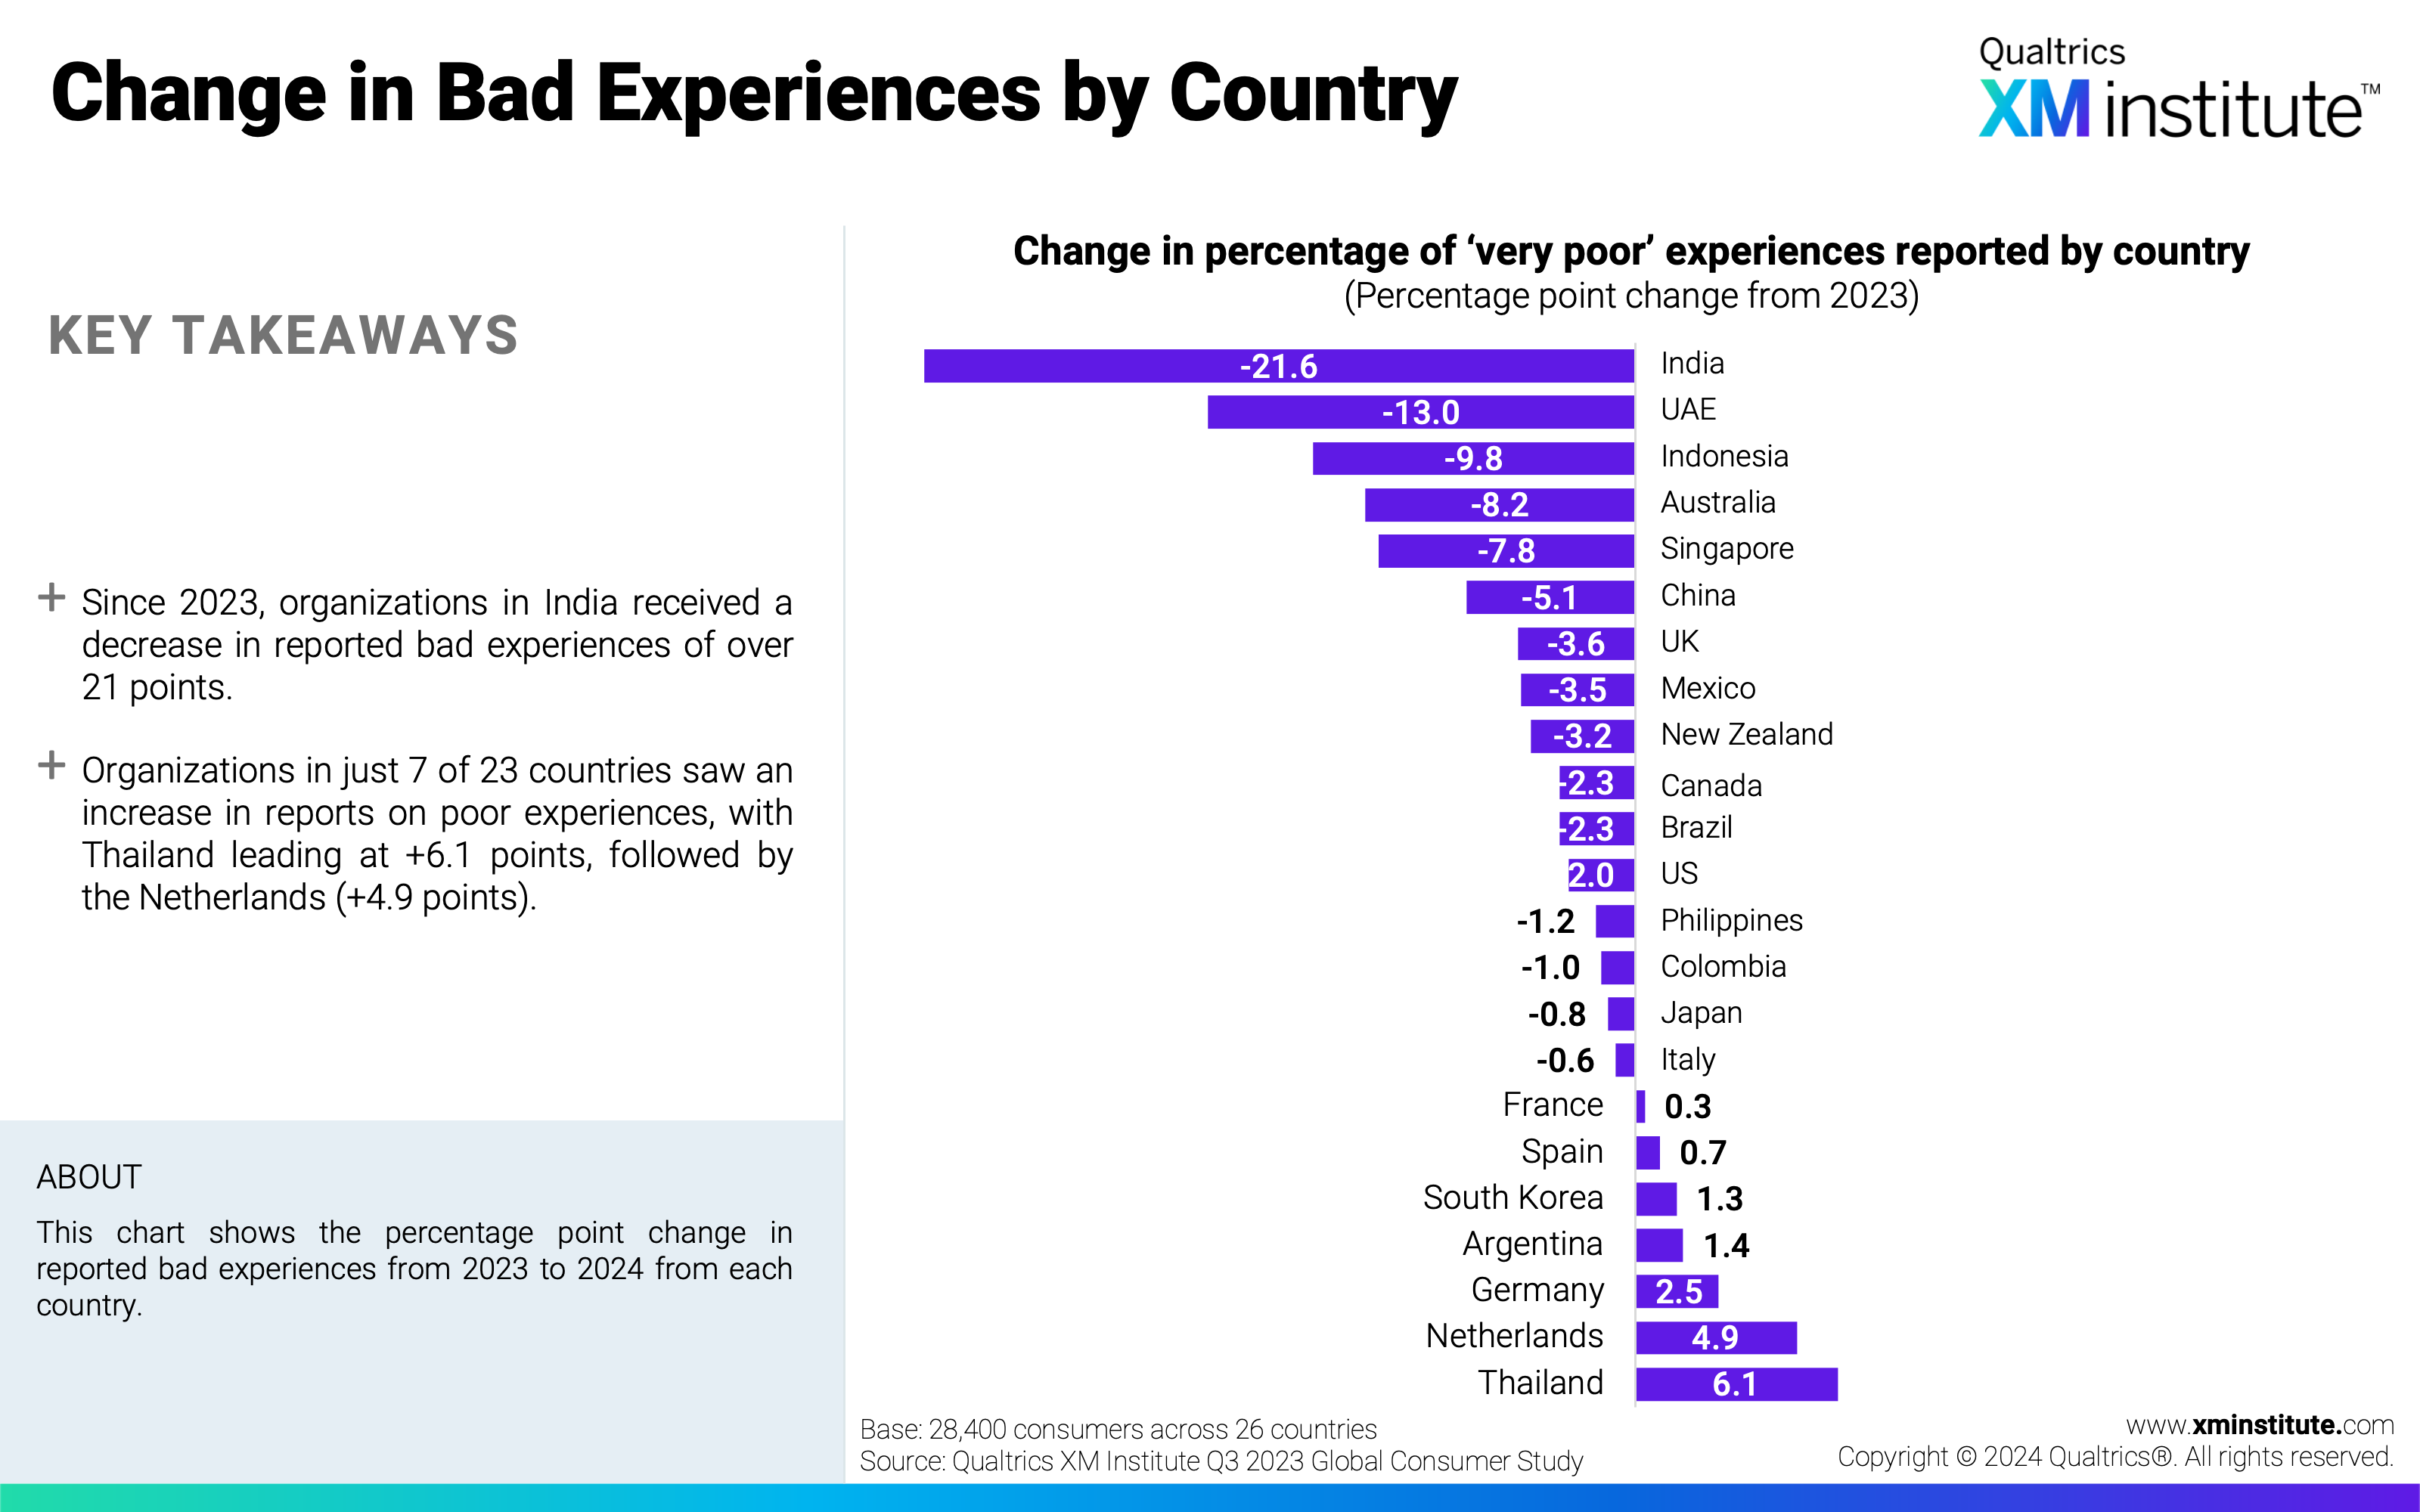 This chart shows the percentage point change in reported bad experiences from 2023 to 2024 from each country. 